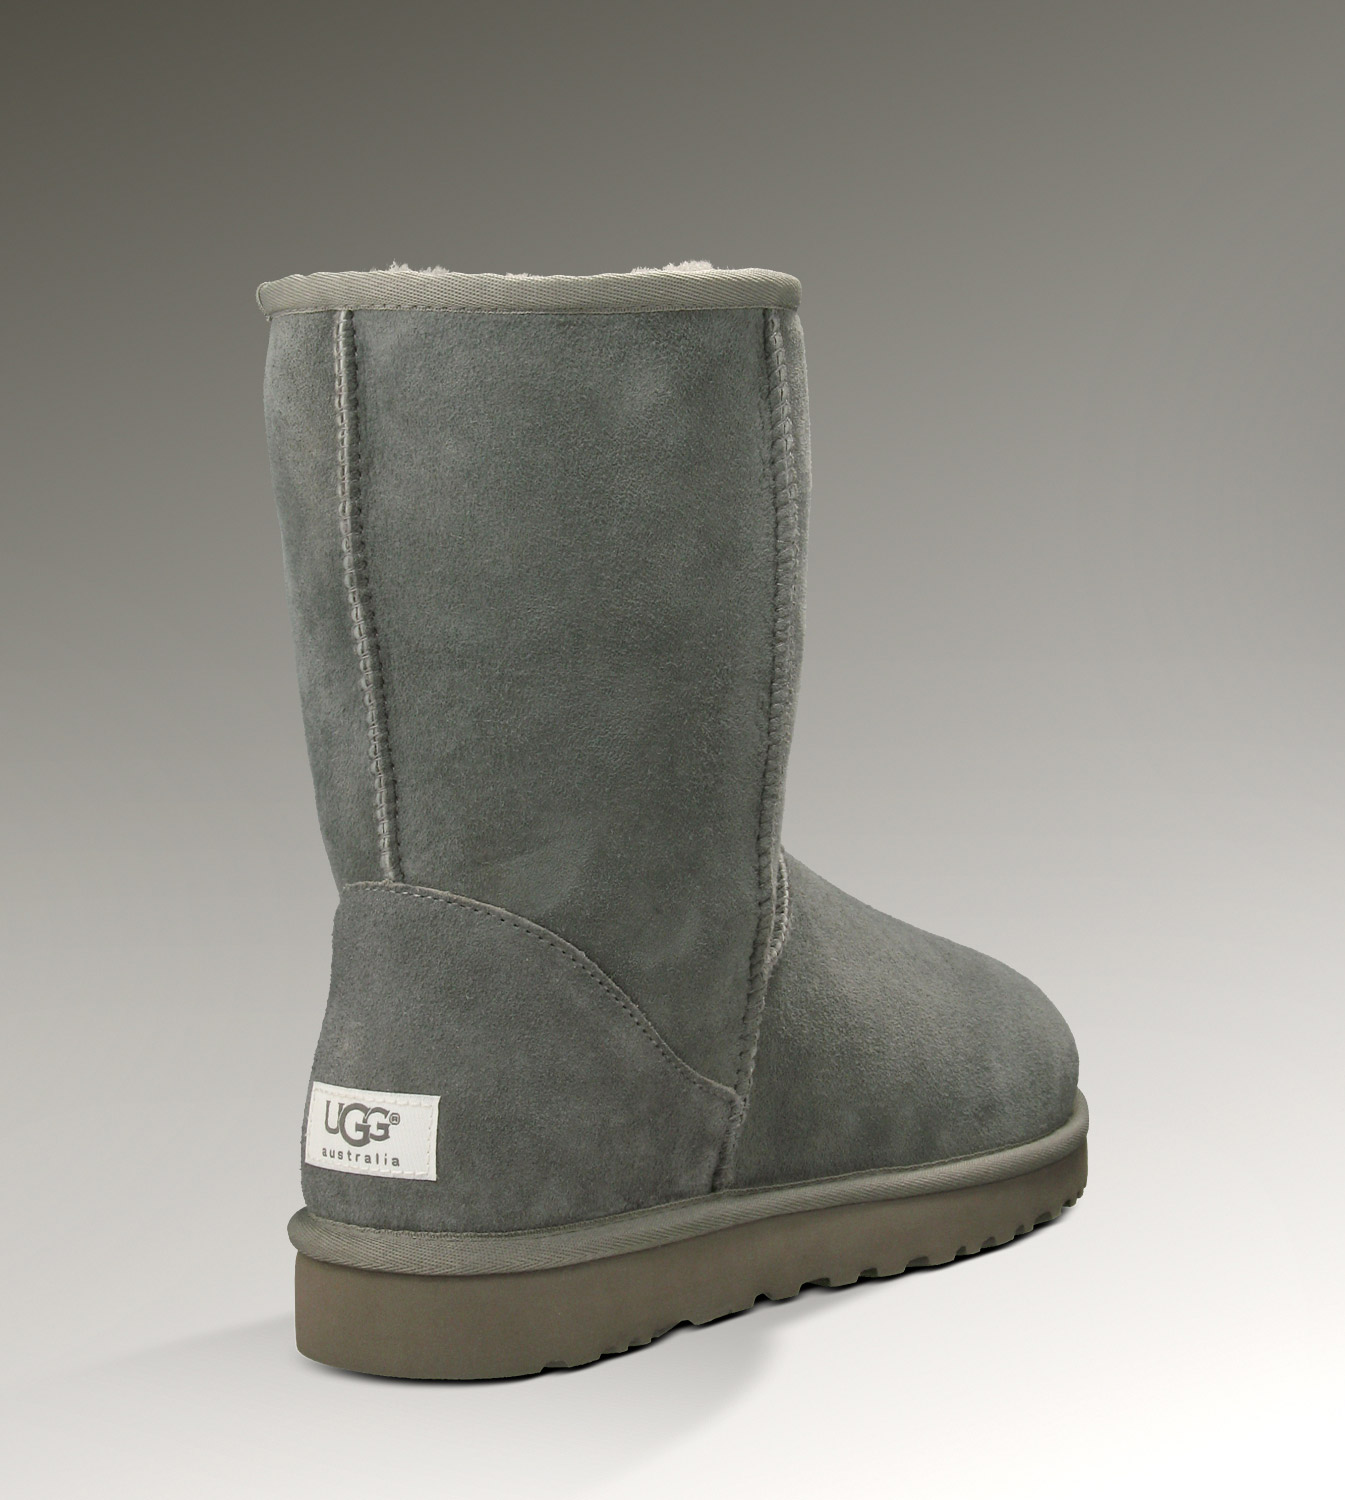 Ugg Outlet Classic Short Grey Boots 094137